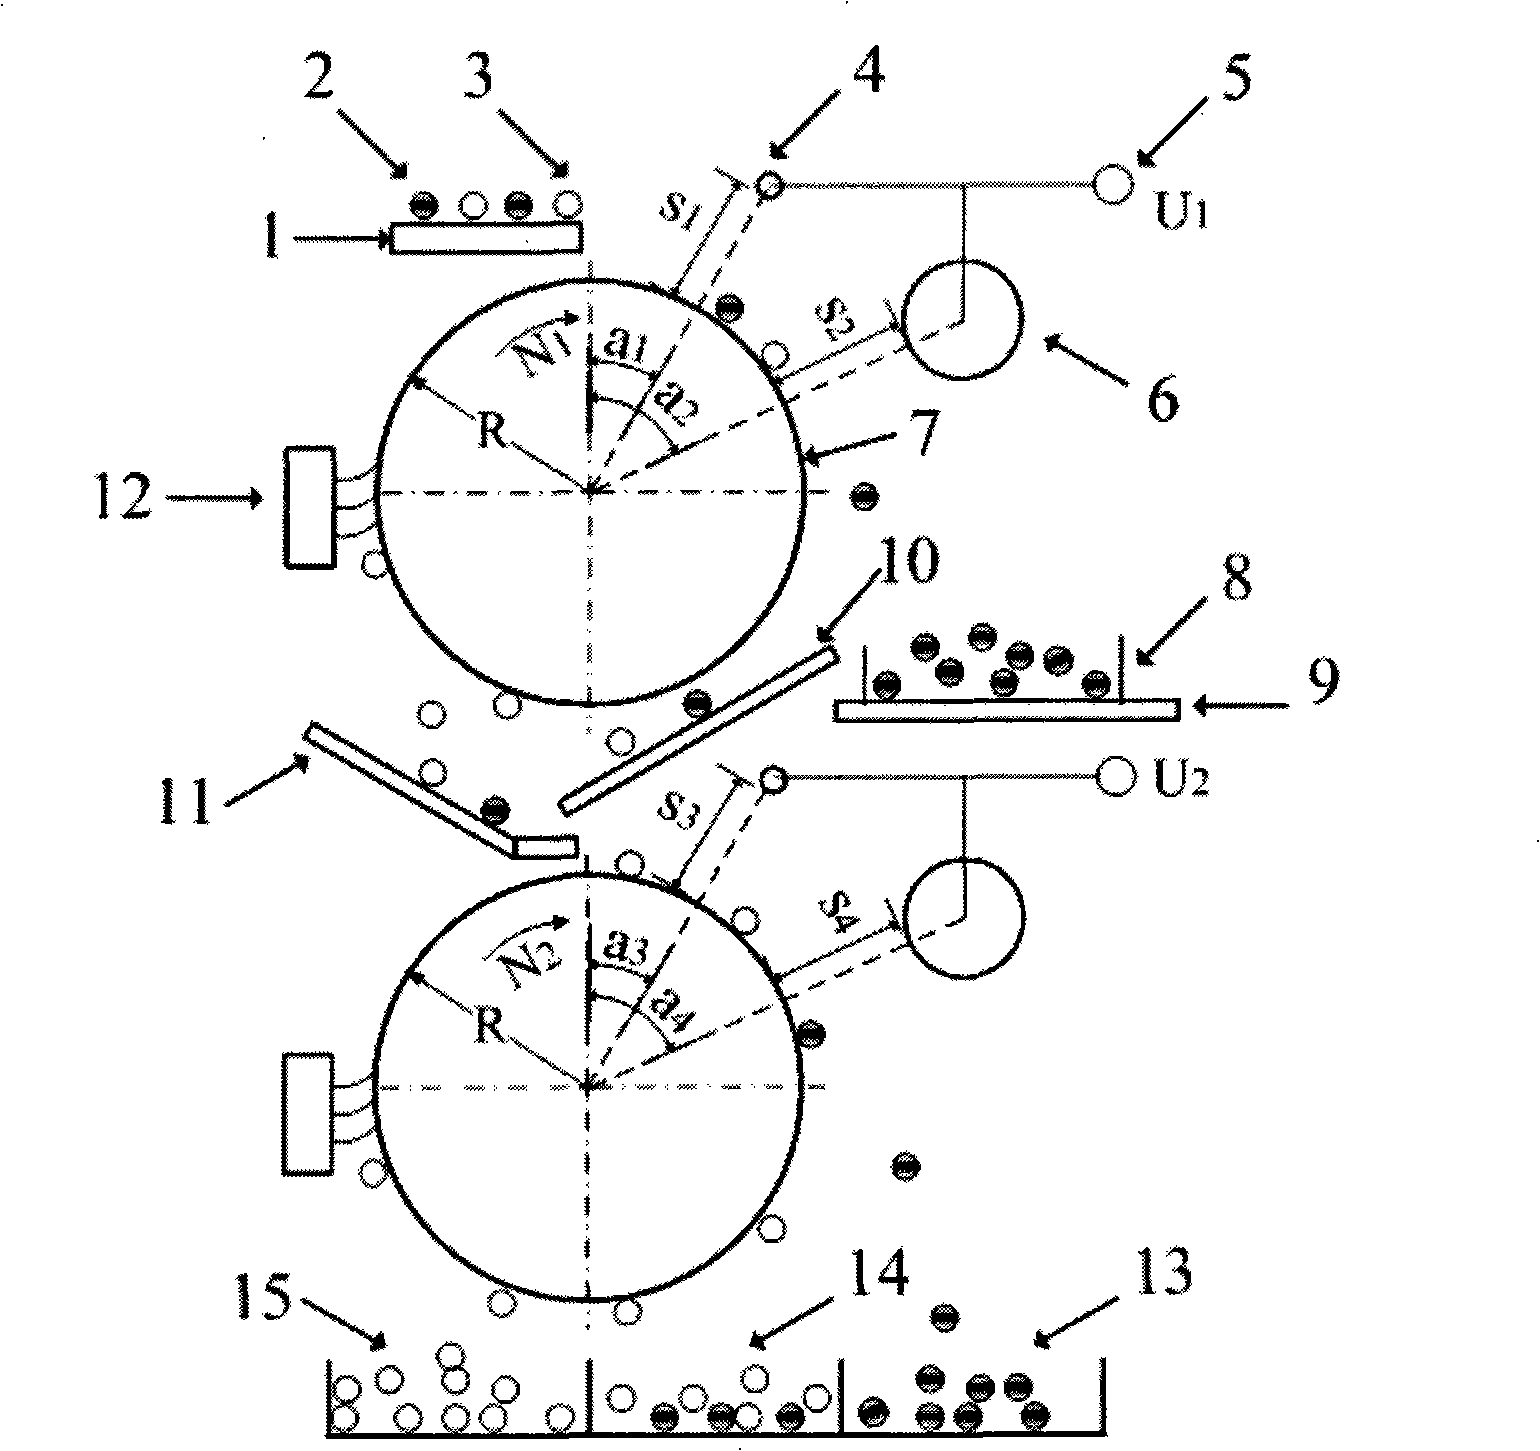 Multiple-roller type high-pressure electrostatic separation method for recovering waste and old printed circuit boards